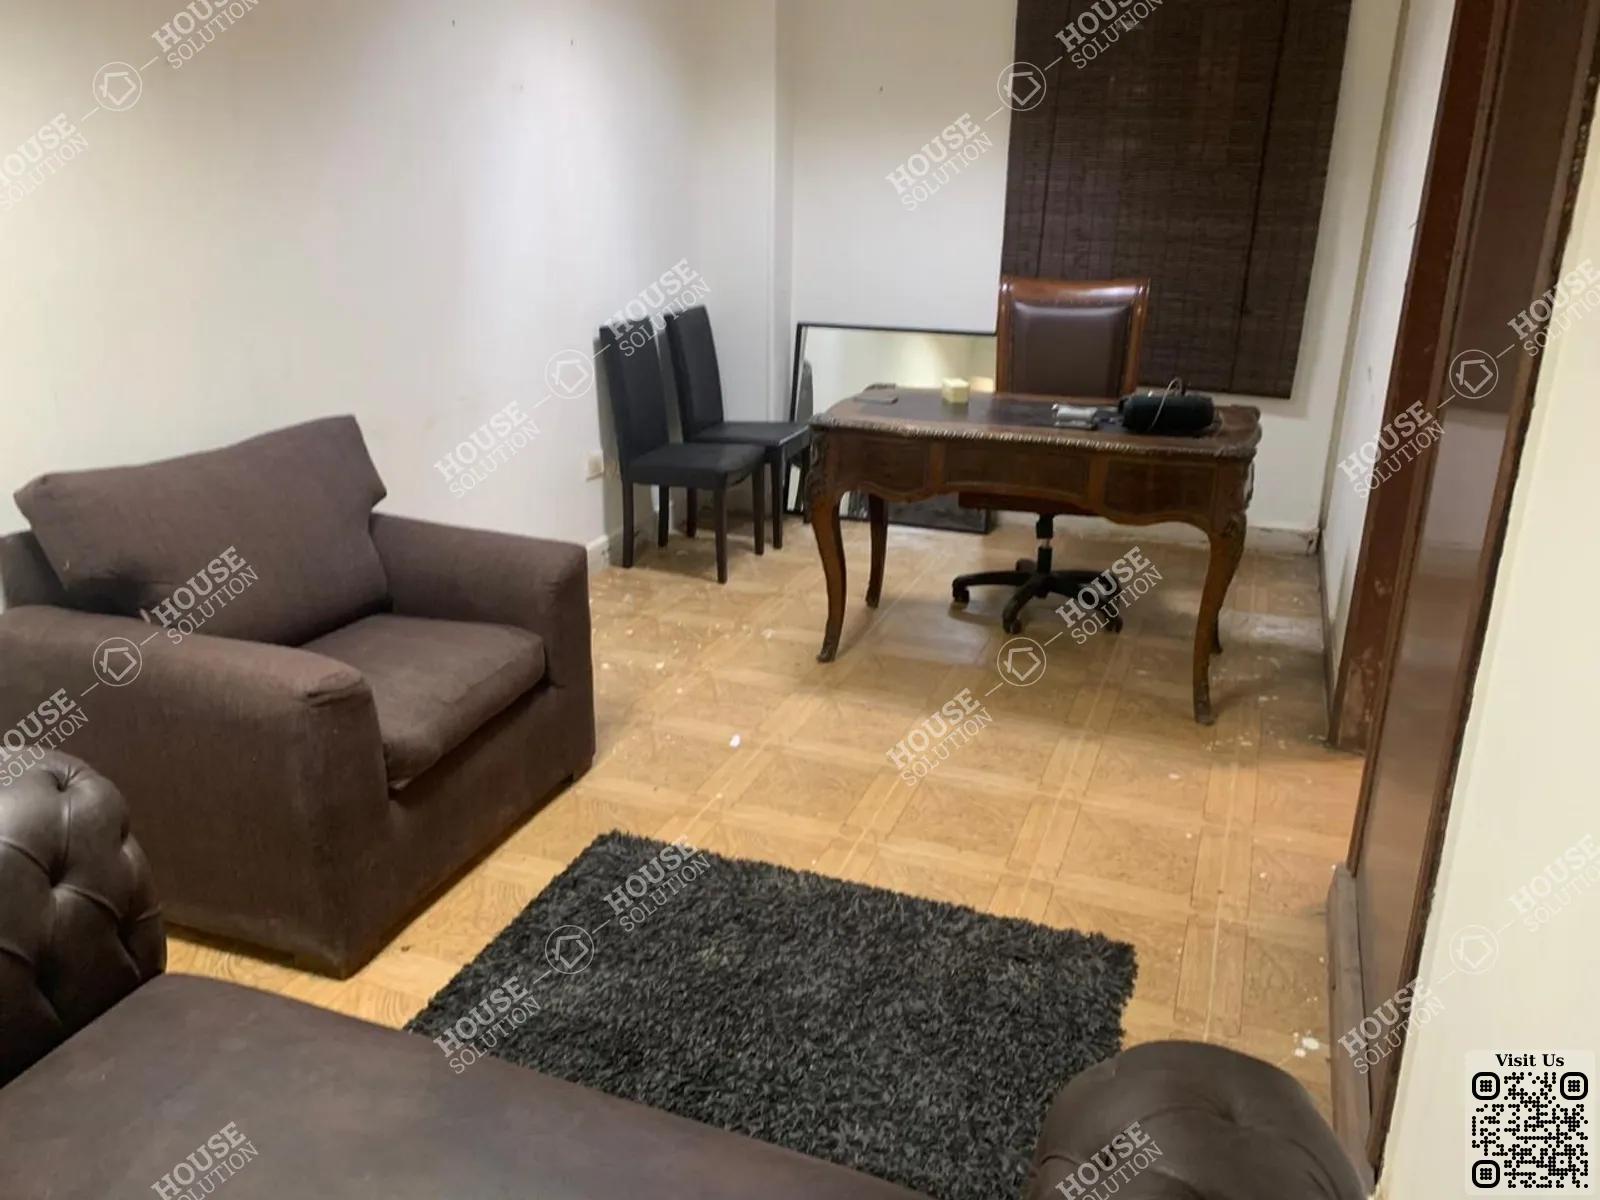 SECOND BEDROOM  @ Office spaces For Rent In Maadi New Maadi Area: 110 m² consists of 2 Bedrooms 1 Bathrooms Semi furnished 3 stars #5691-2